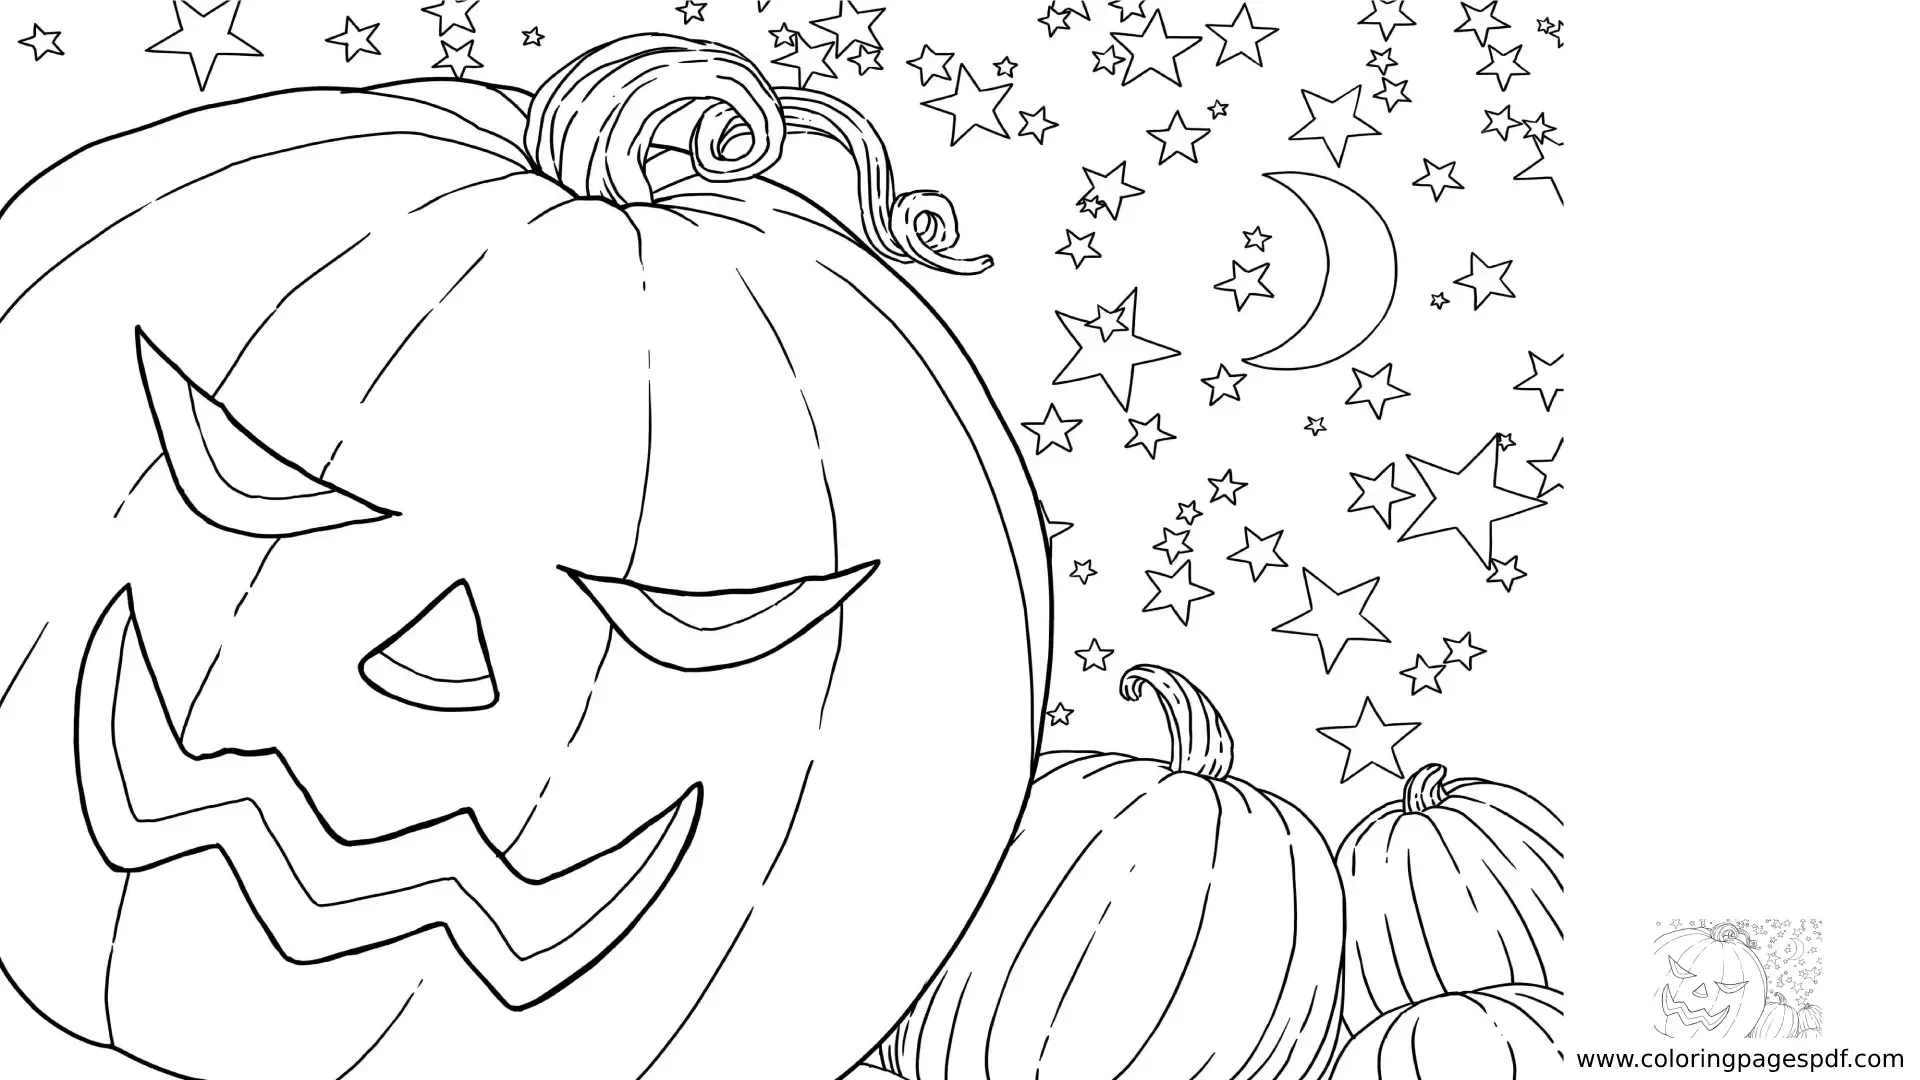 Coloring Page Of An Angry Pumpkin